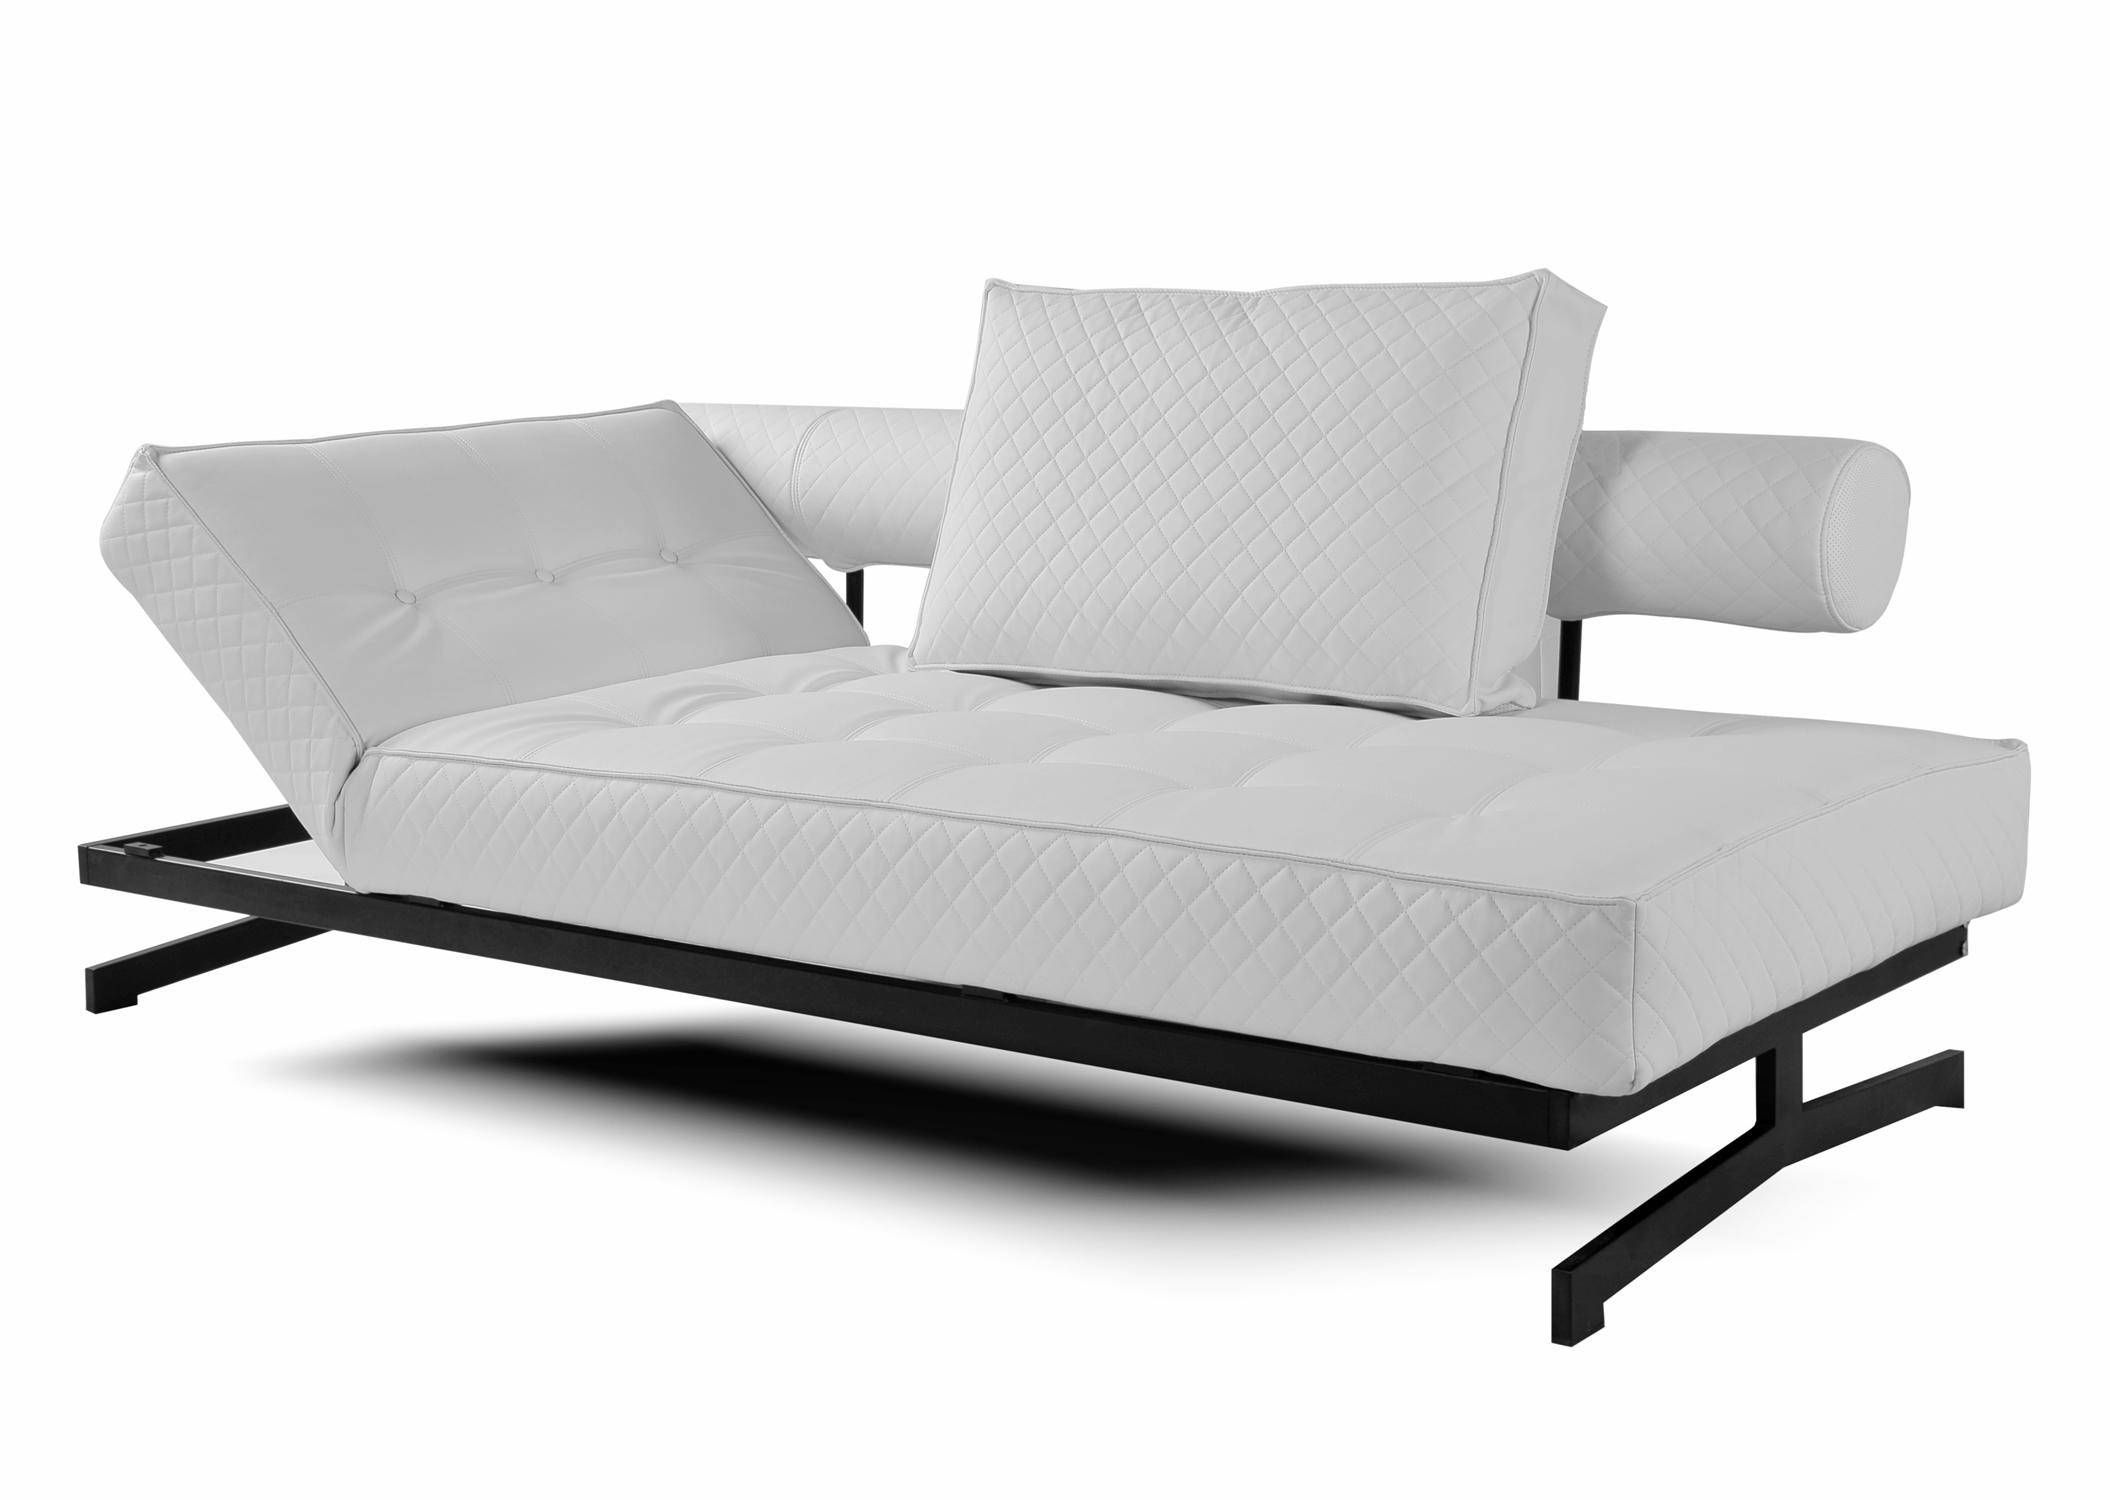 lounger sofa bed cover